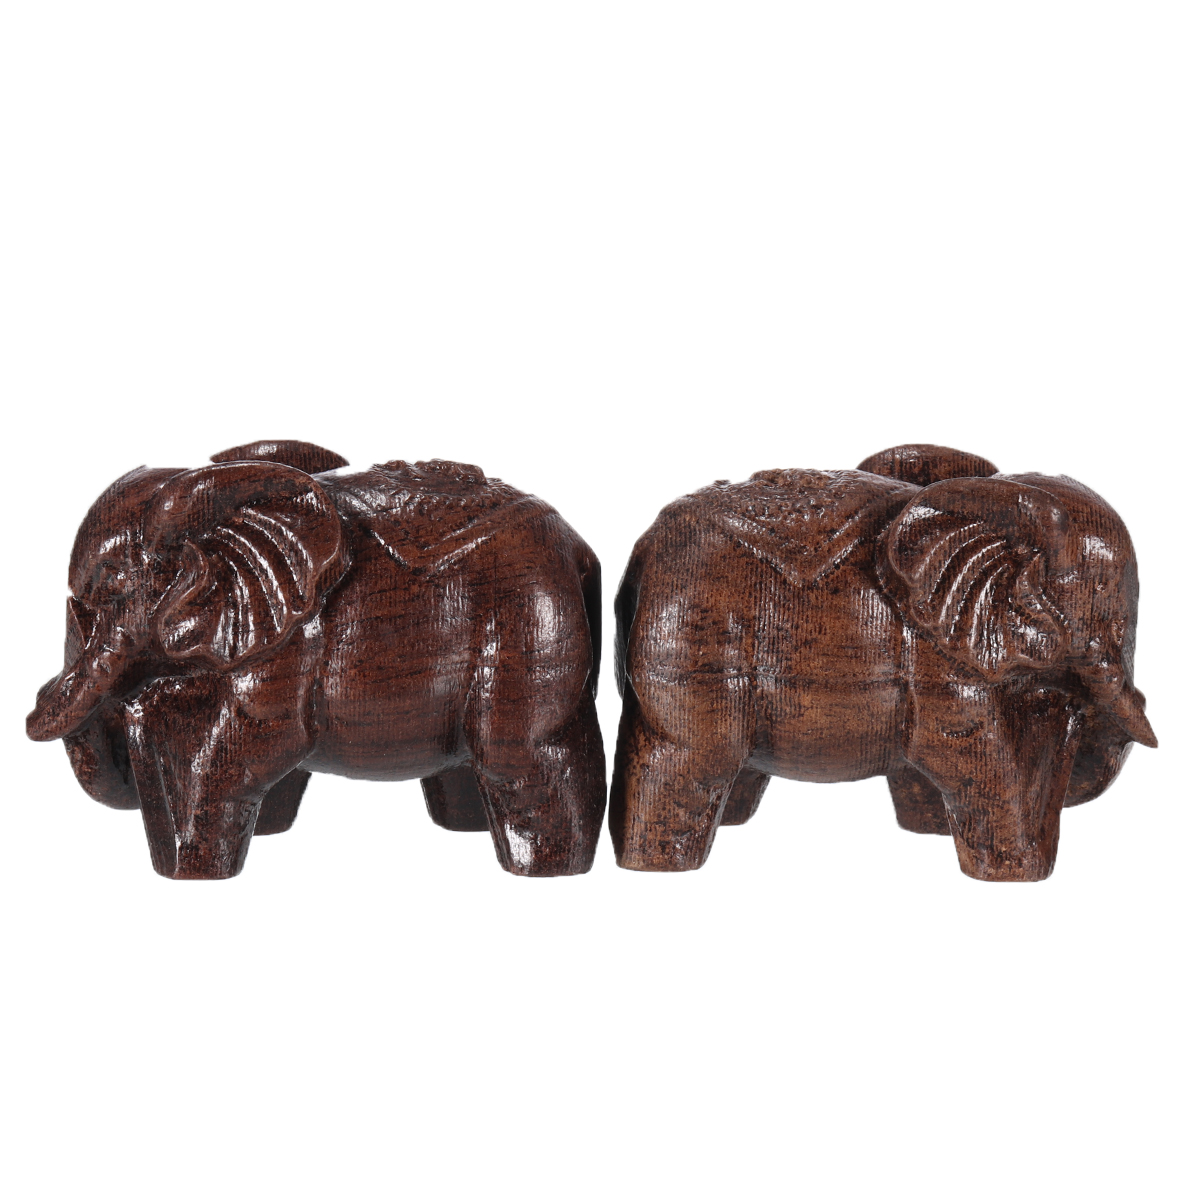 1-Pair-Natural-Agarwood-Elephant-Wood-Carving-Wood-Crafts-Retro-Decoration-Craft-Creative-Gifts-Home-1759099-6